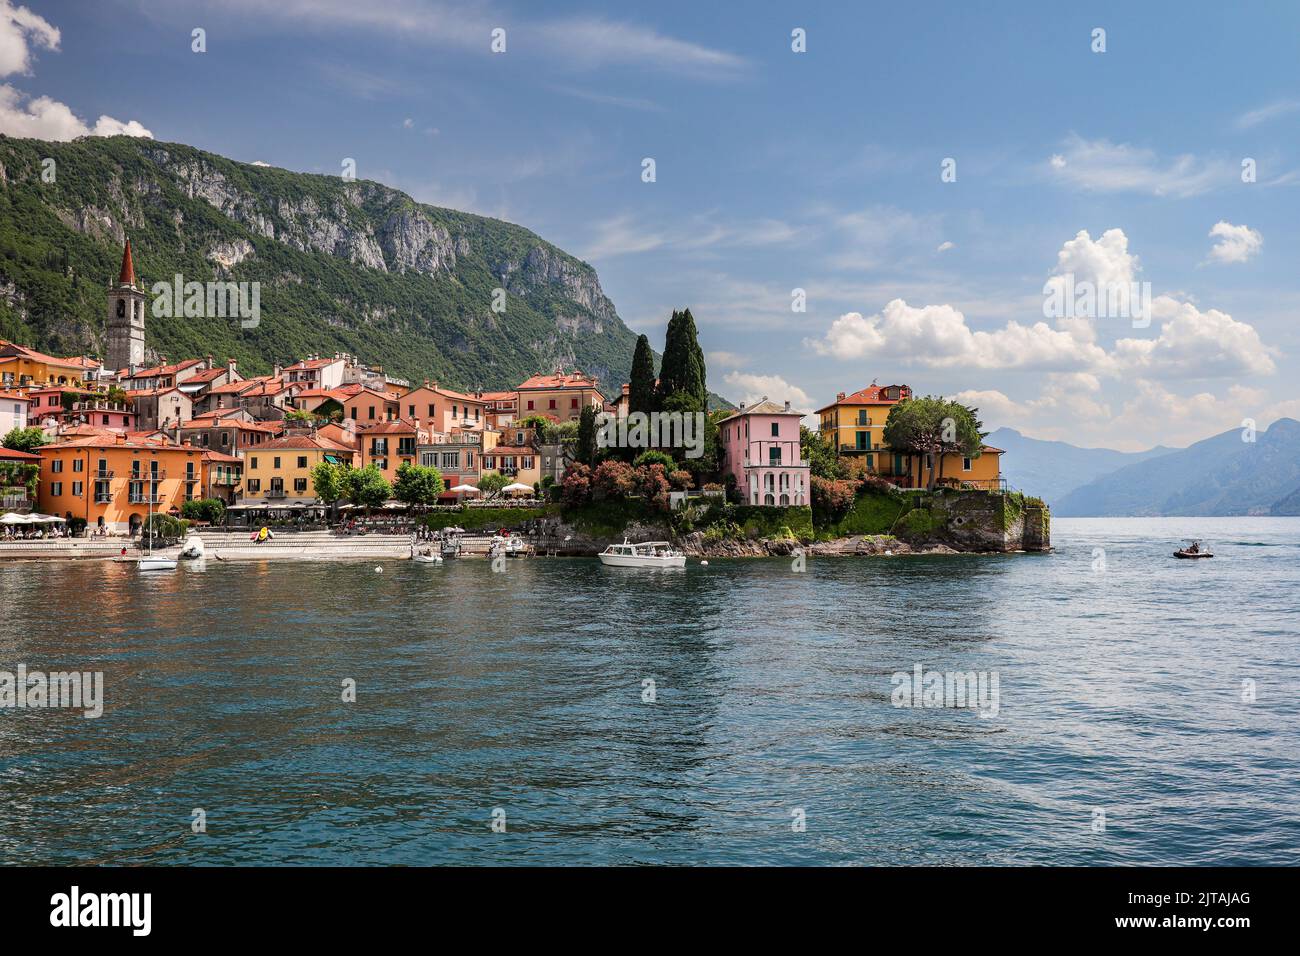 Picturesque Colorful Town at Lake Como. Scenic View of Varenna in Lombardy. Italian Comune surrounded by Mountains in Europe. Stock Photo